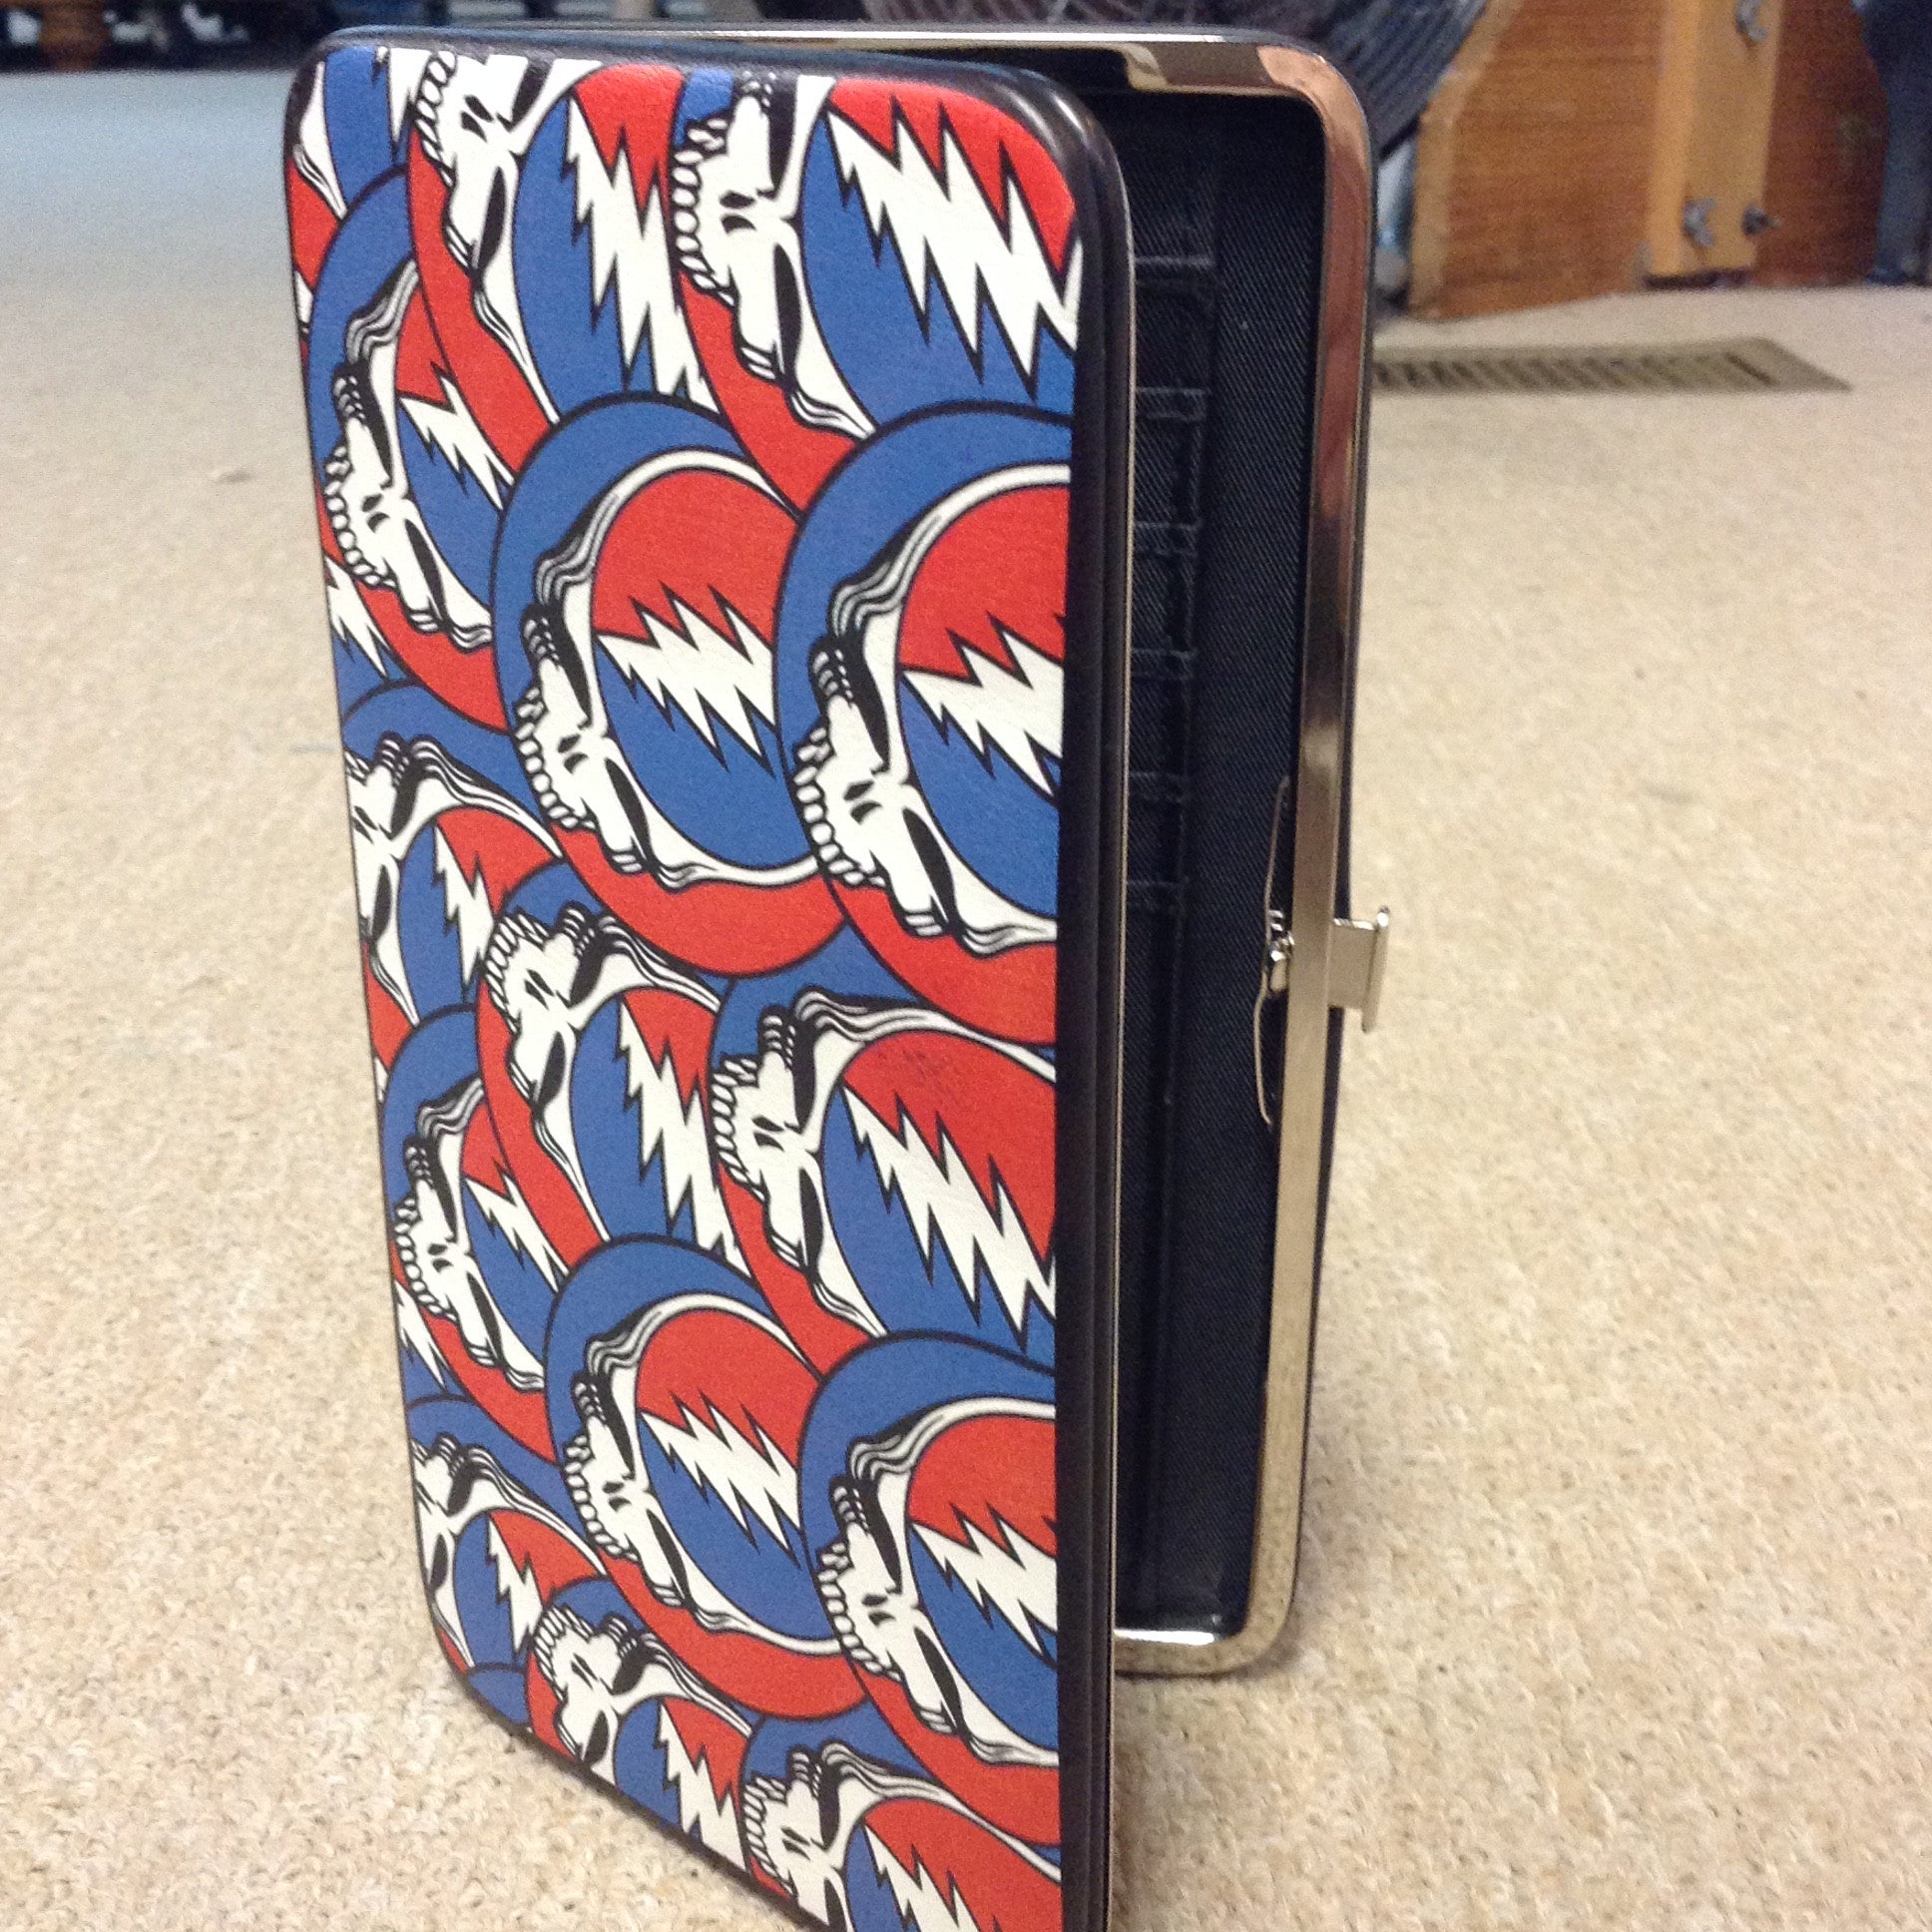 Grateful Dead Steal Your Face Collage Hinged Wallet - HalfMoonMusic